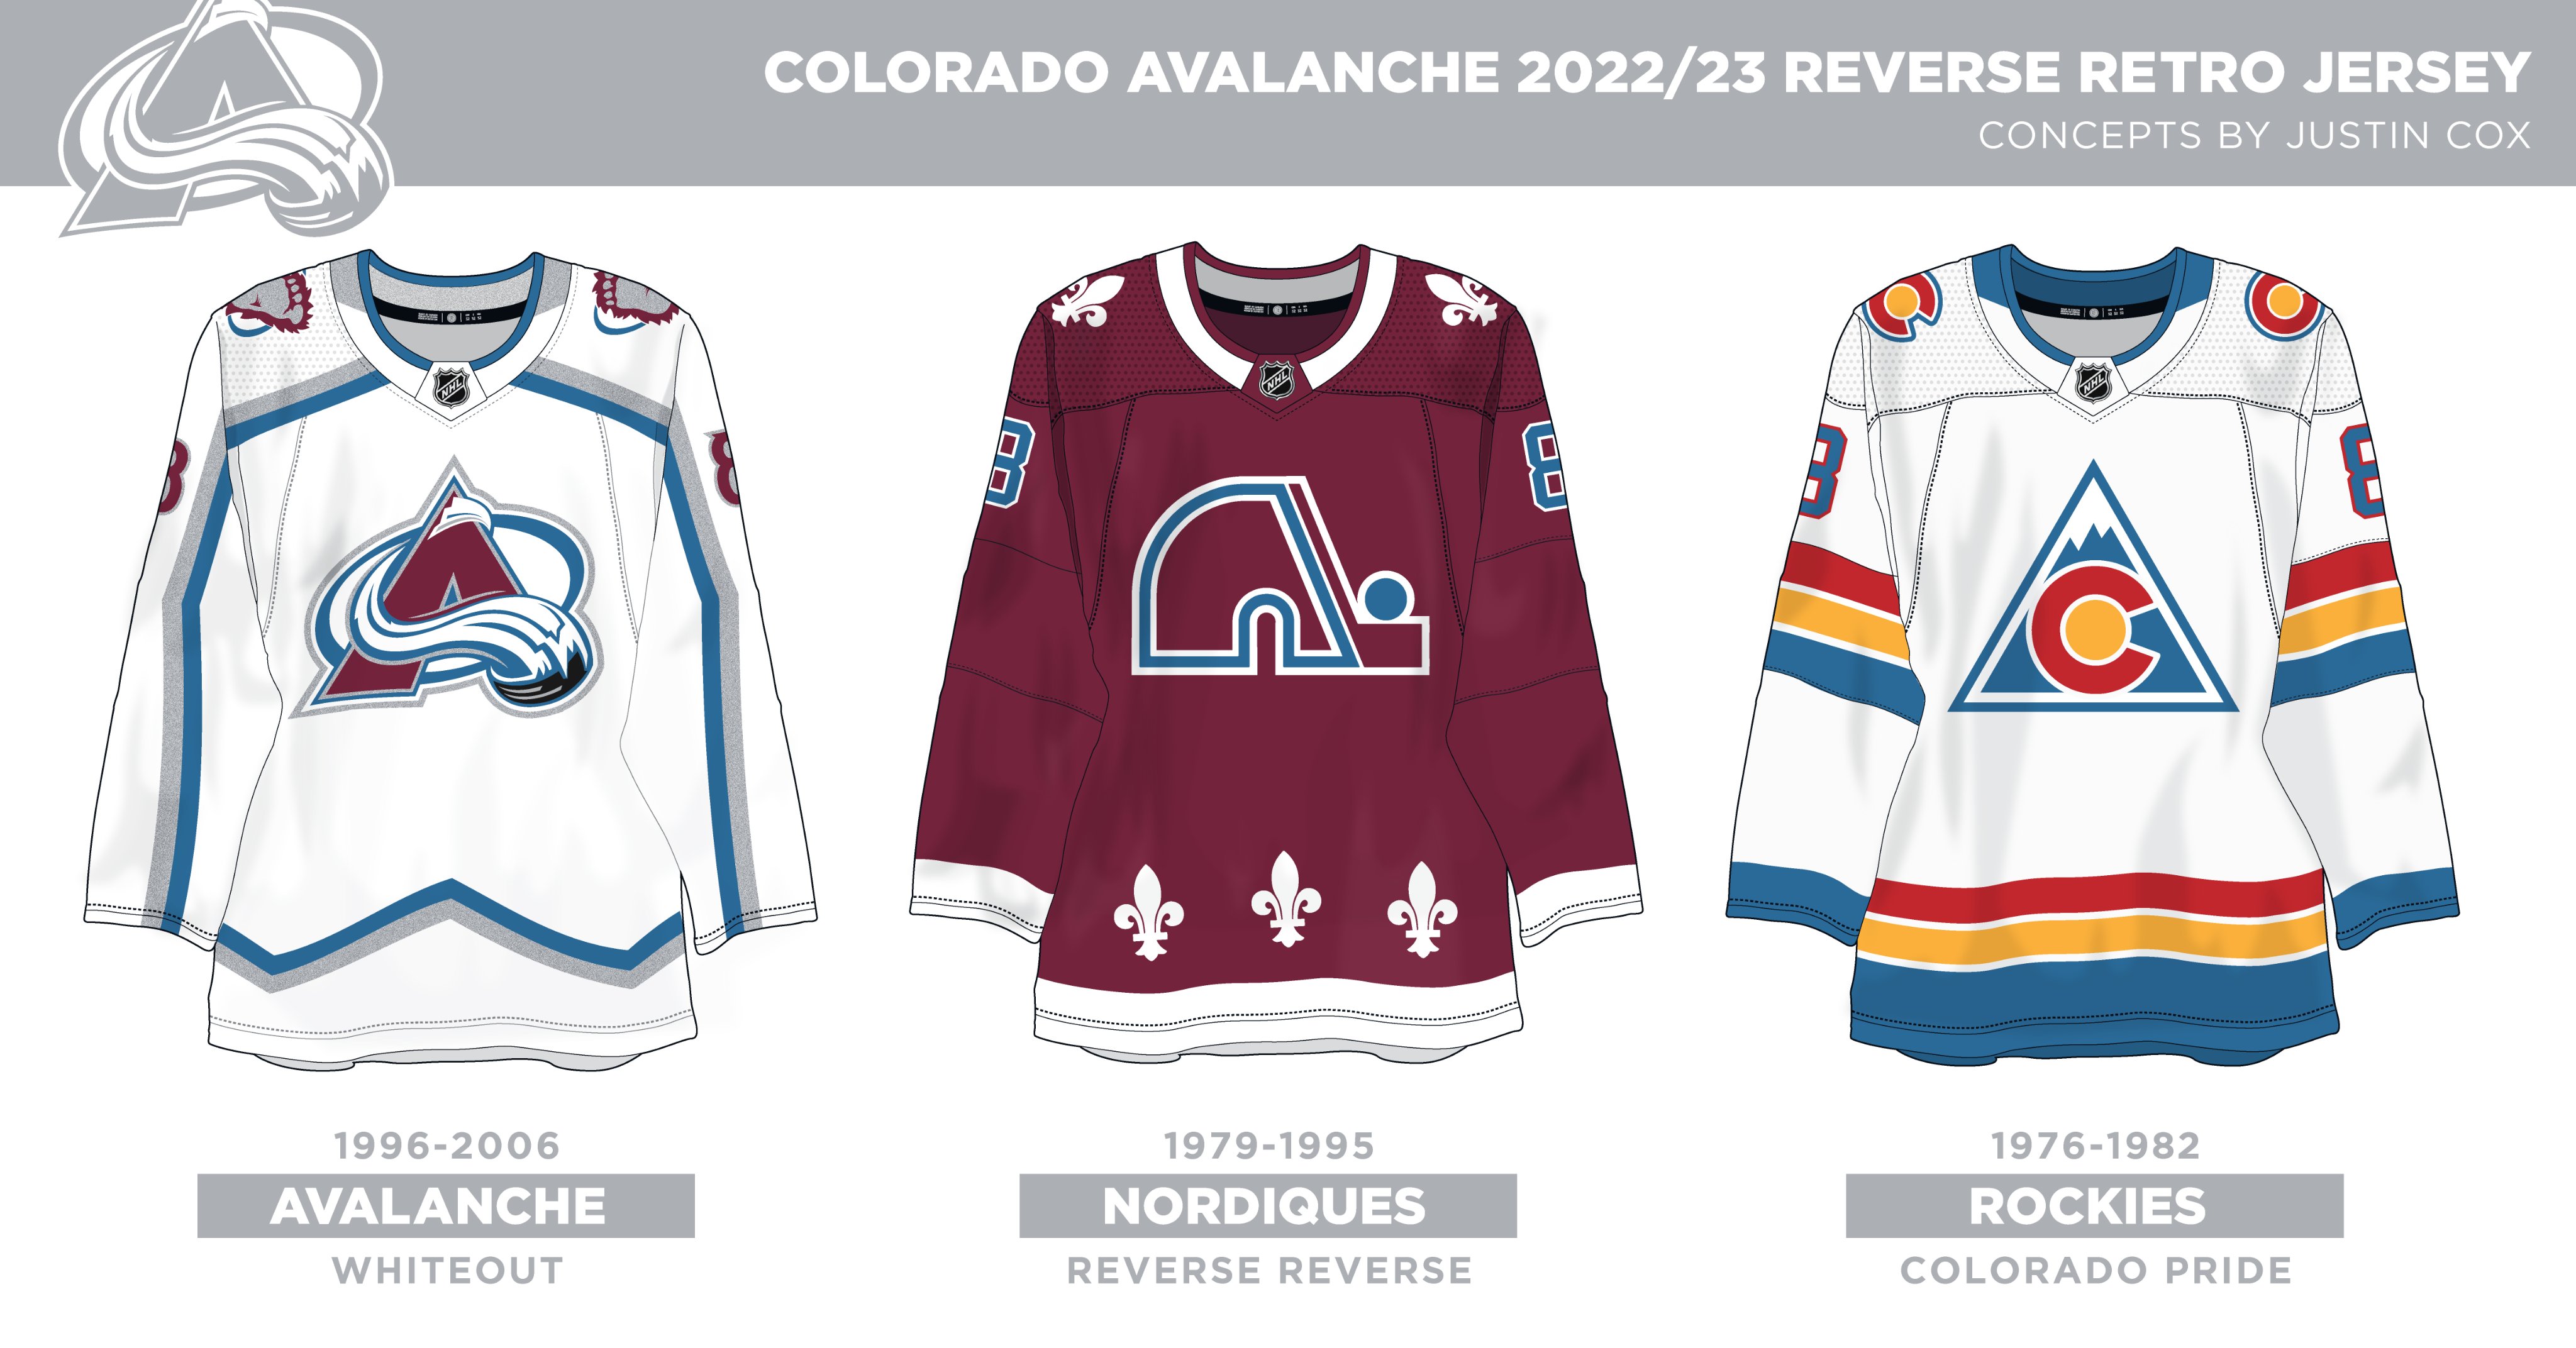 Avs Reverse Retro: More details unveiled for the new jersey